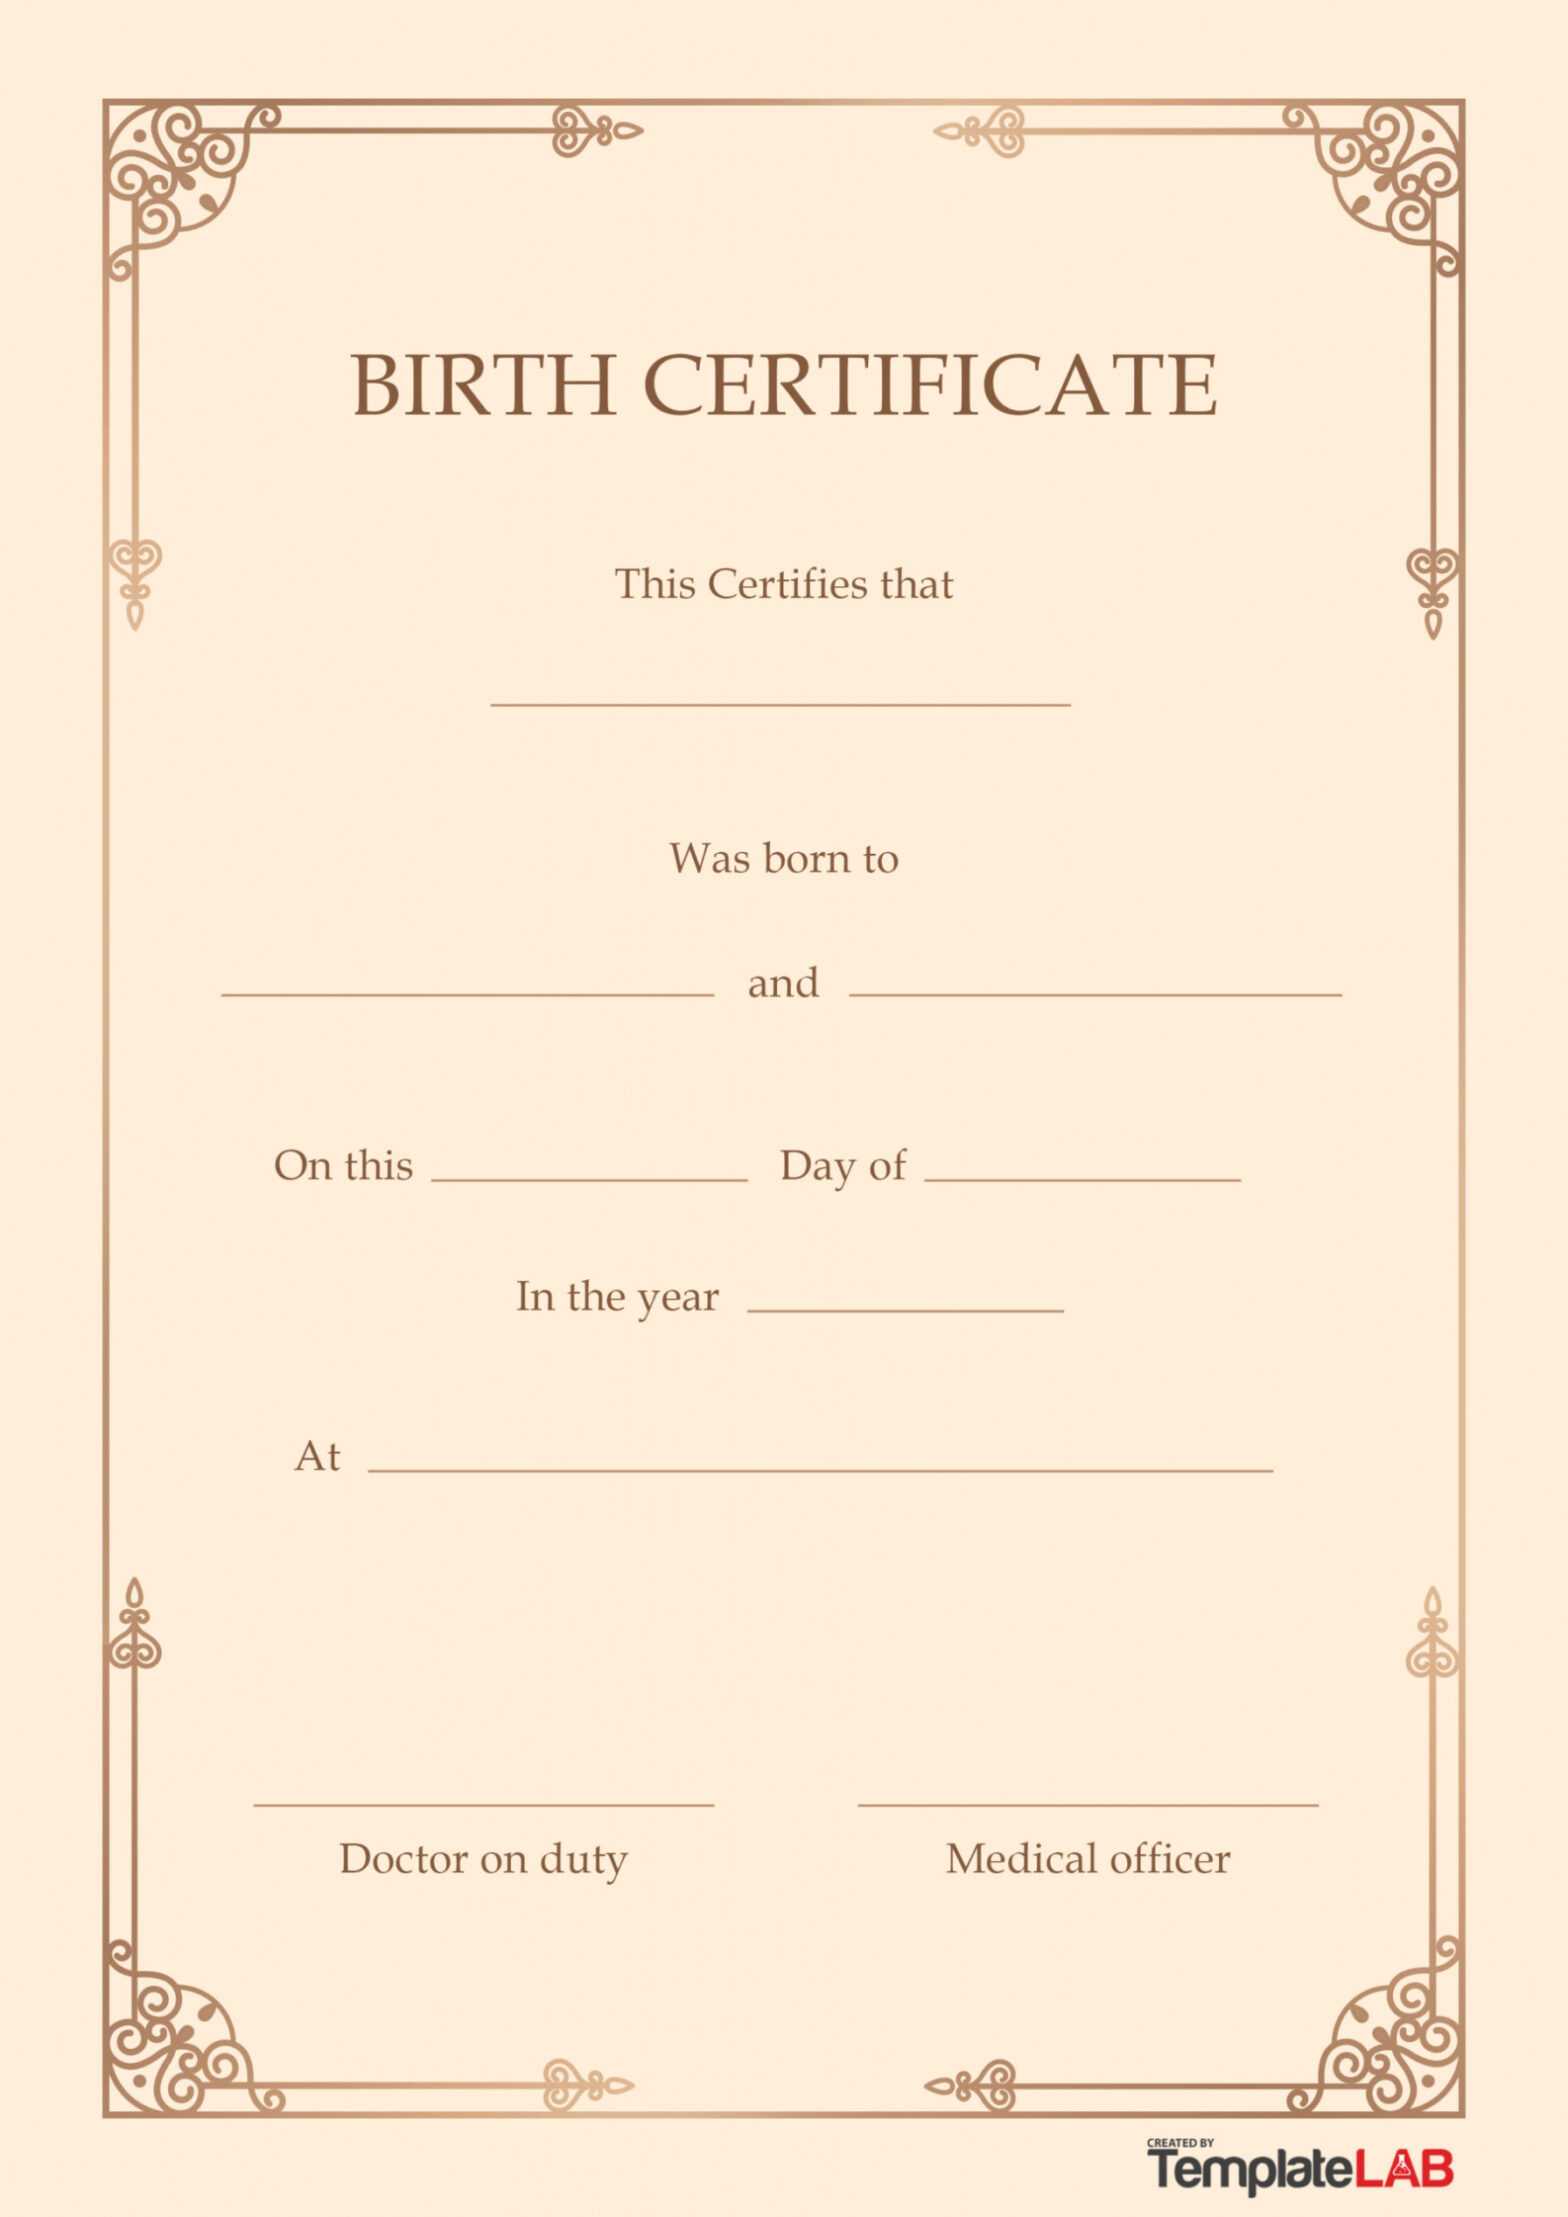 15 Birth Certificate Templates (Word &amp; Pdf) ᐅ Templatelab regarding Birth Certificate Template For Microsoft Word